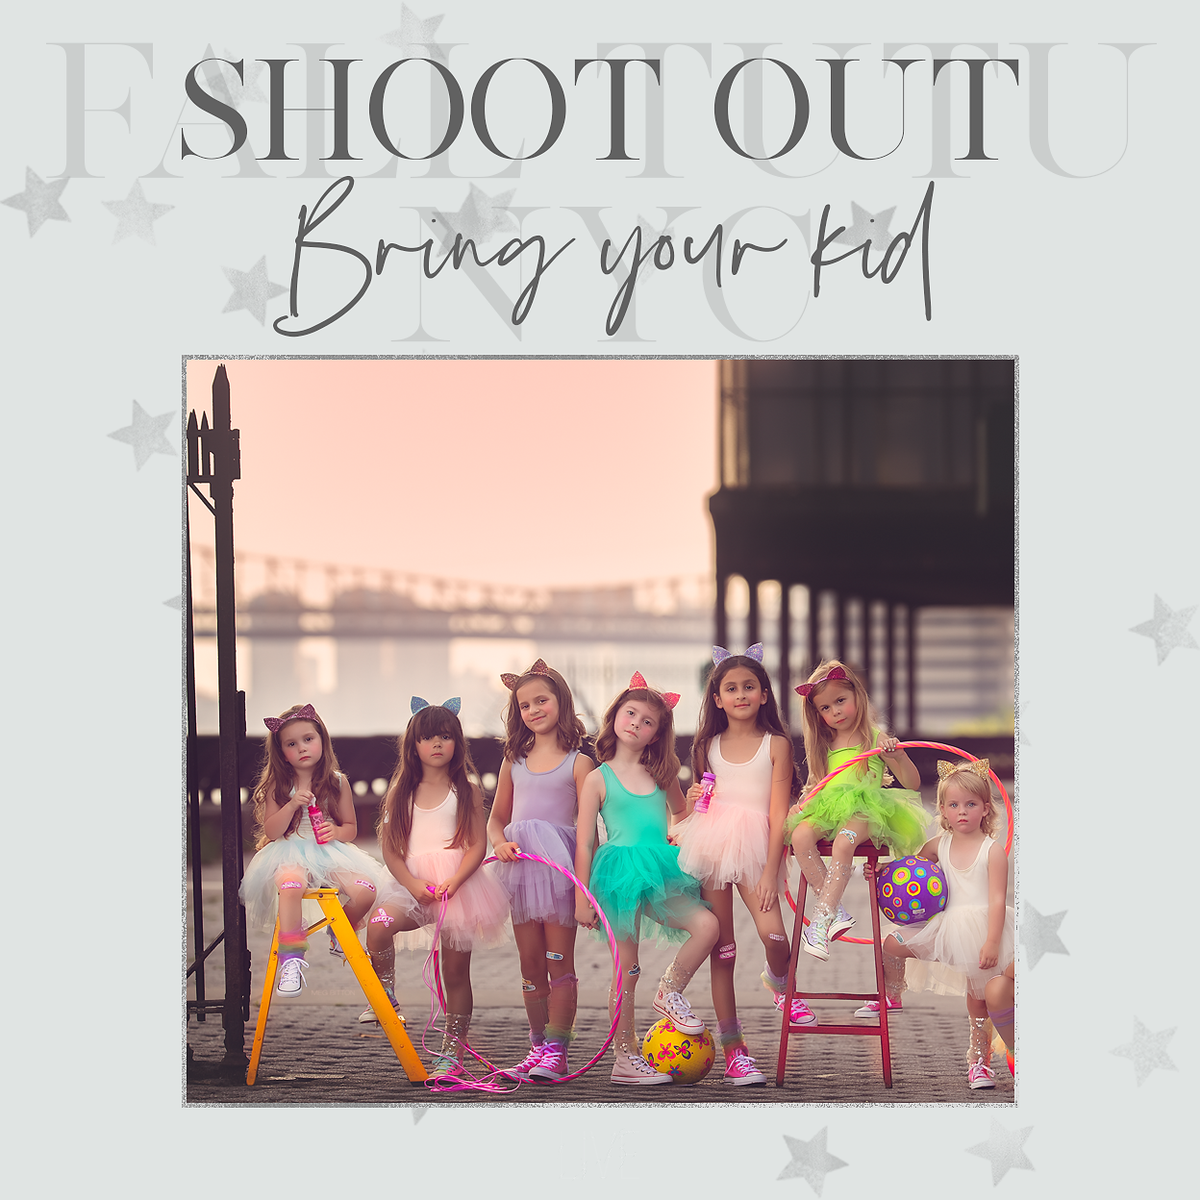 Fall Tutu Shoot Out NYC - Bring Your Own Kid - Meg Bitton Productions